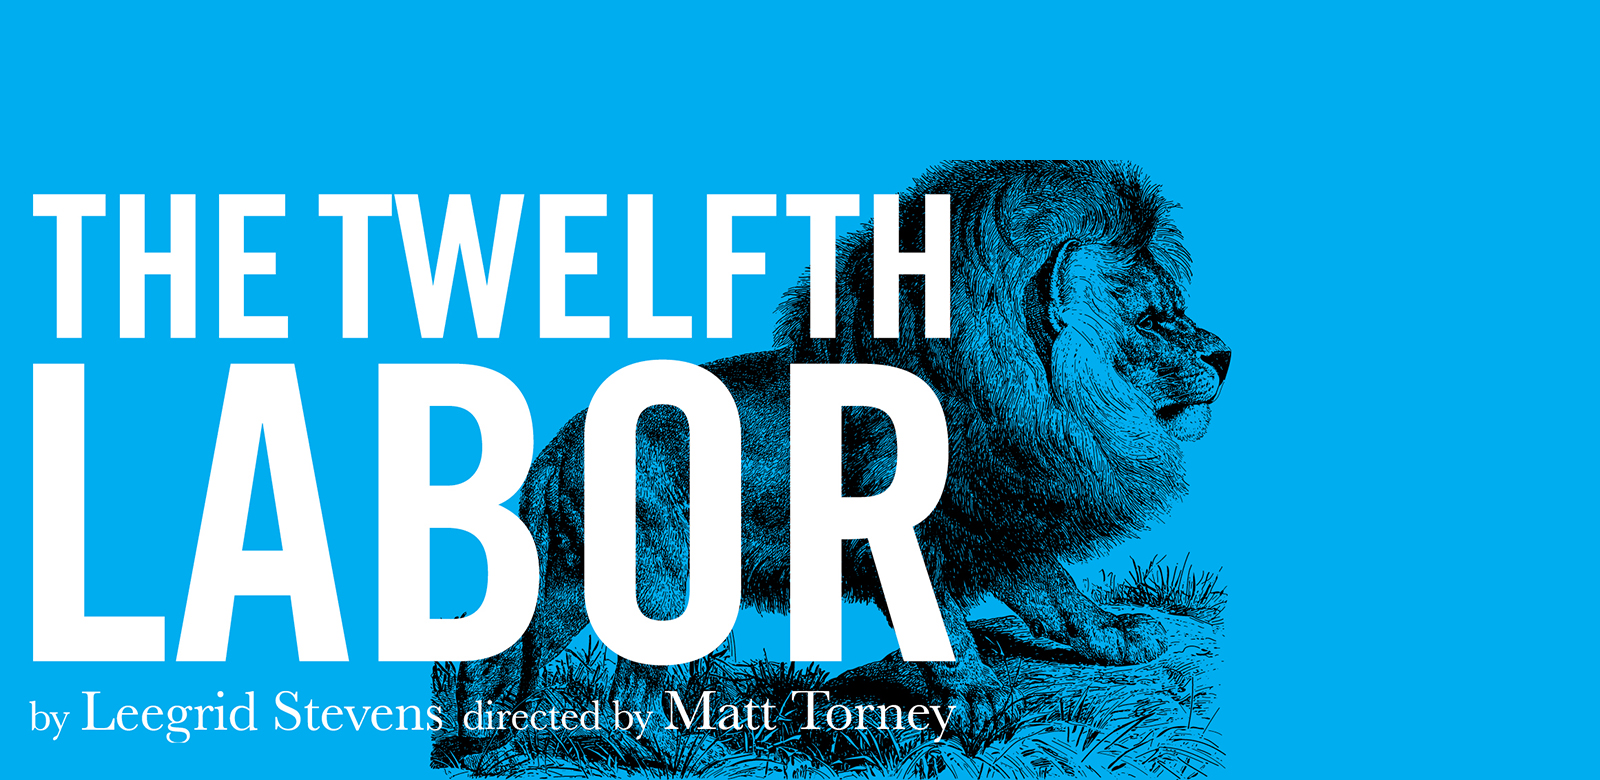 Loading Dock Theatre Show: The Twelfth Labor